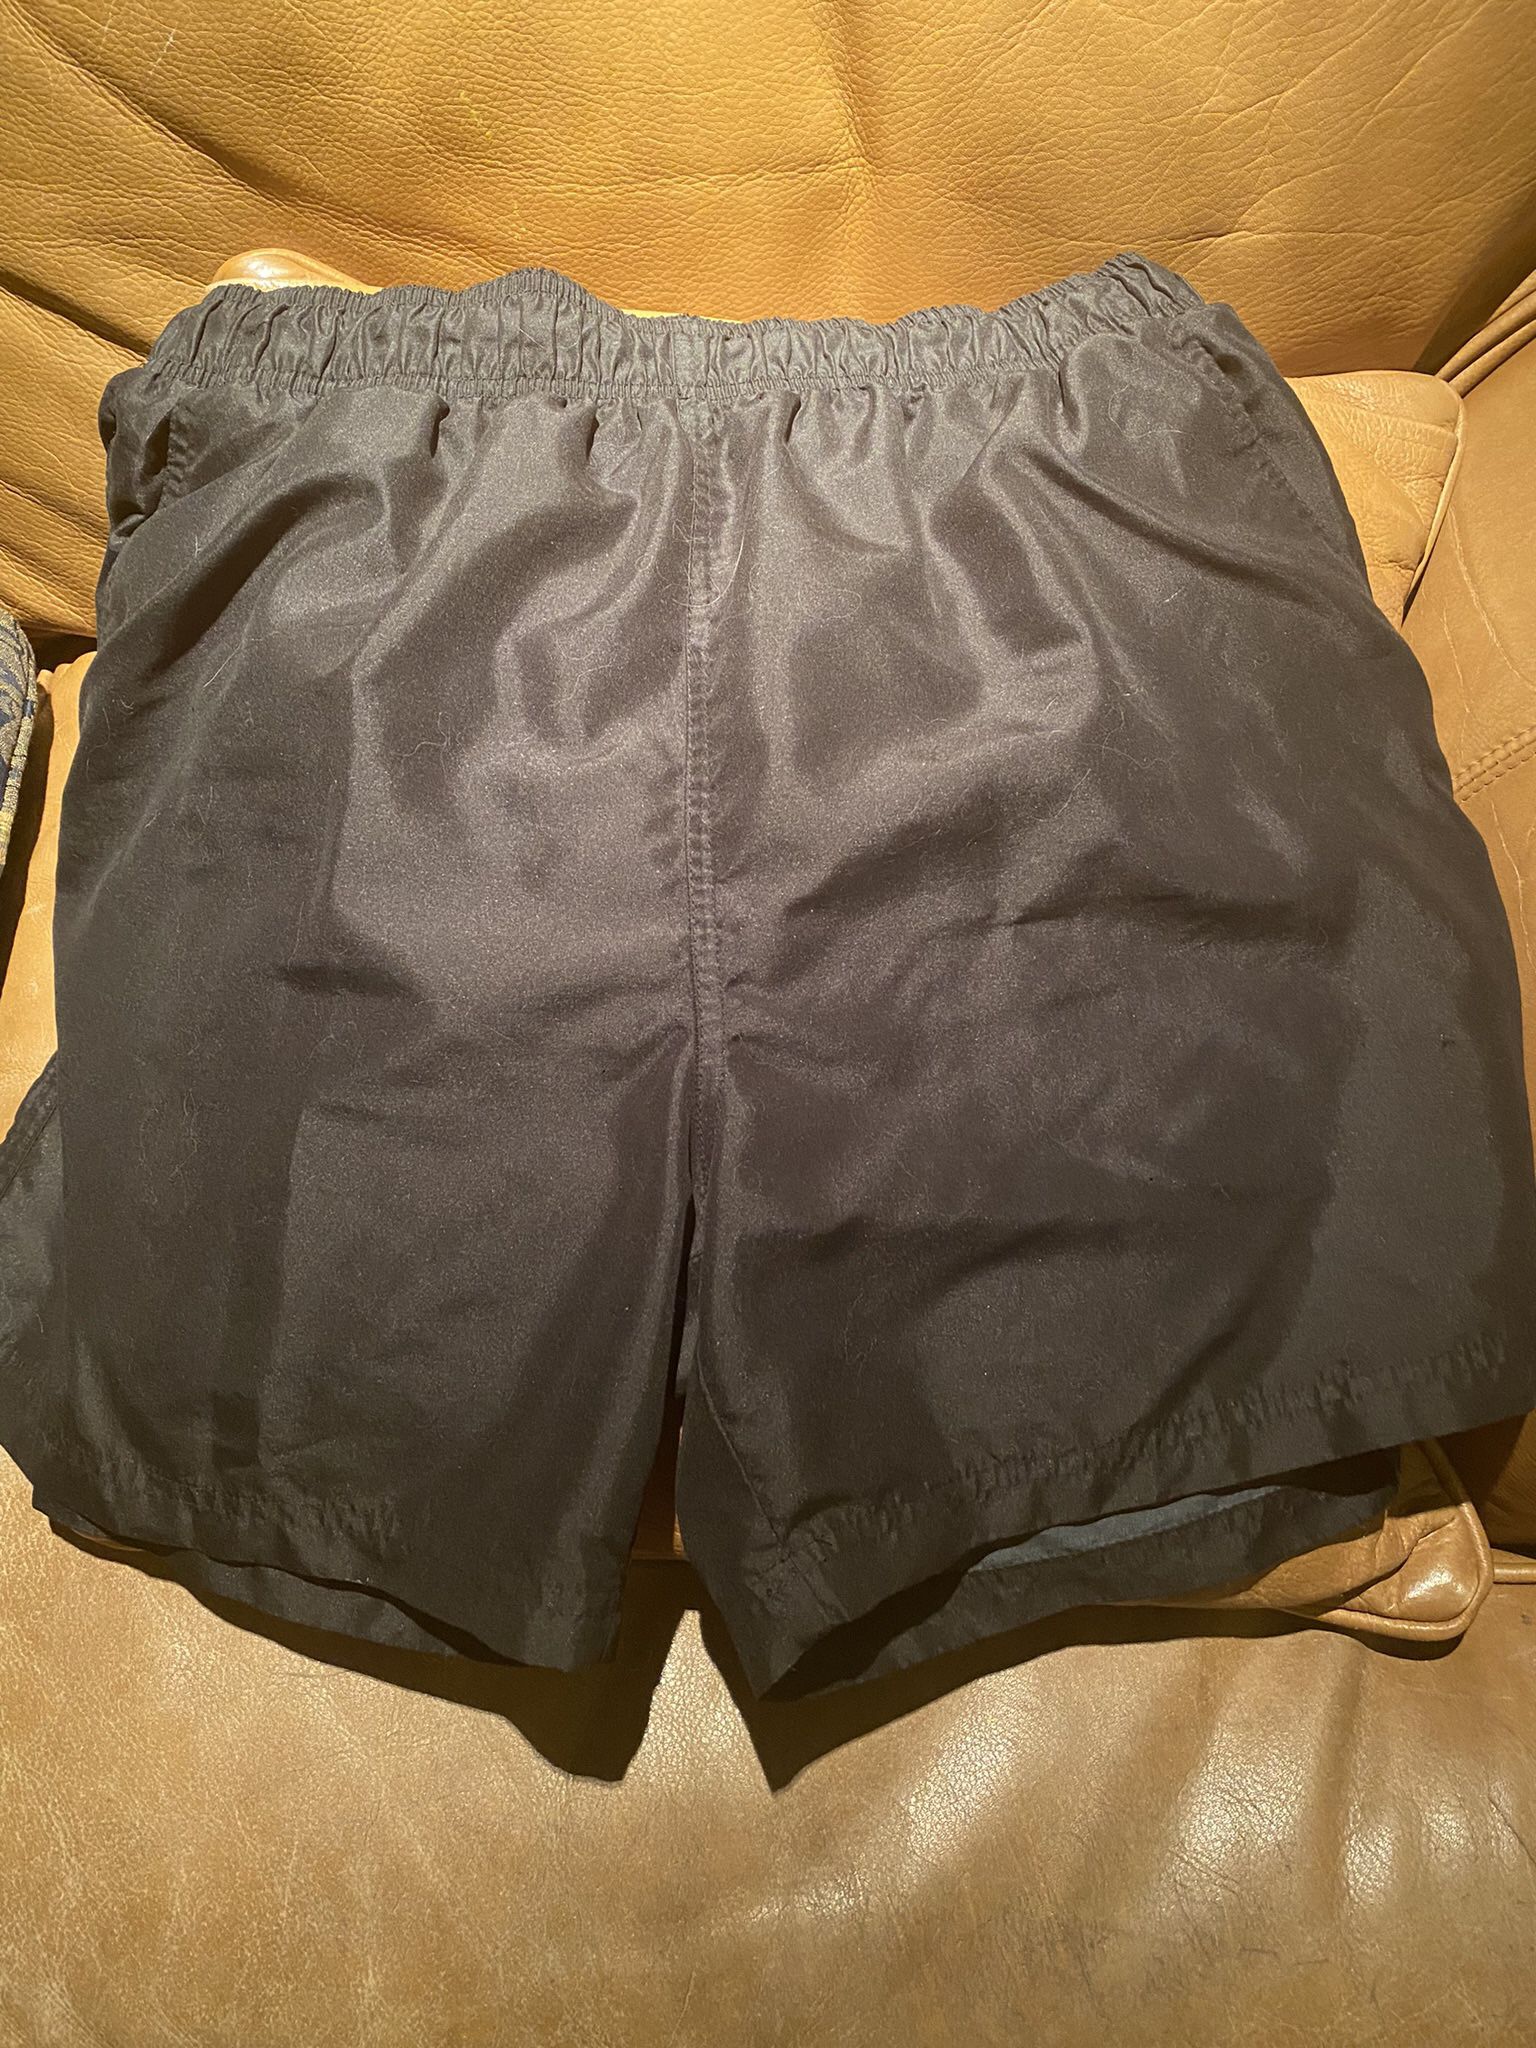 Mens Faded Glory Brand Nylon Shorts Size Large 36-38 for Sale in Fresno ...